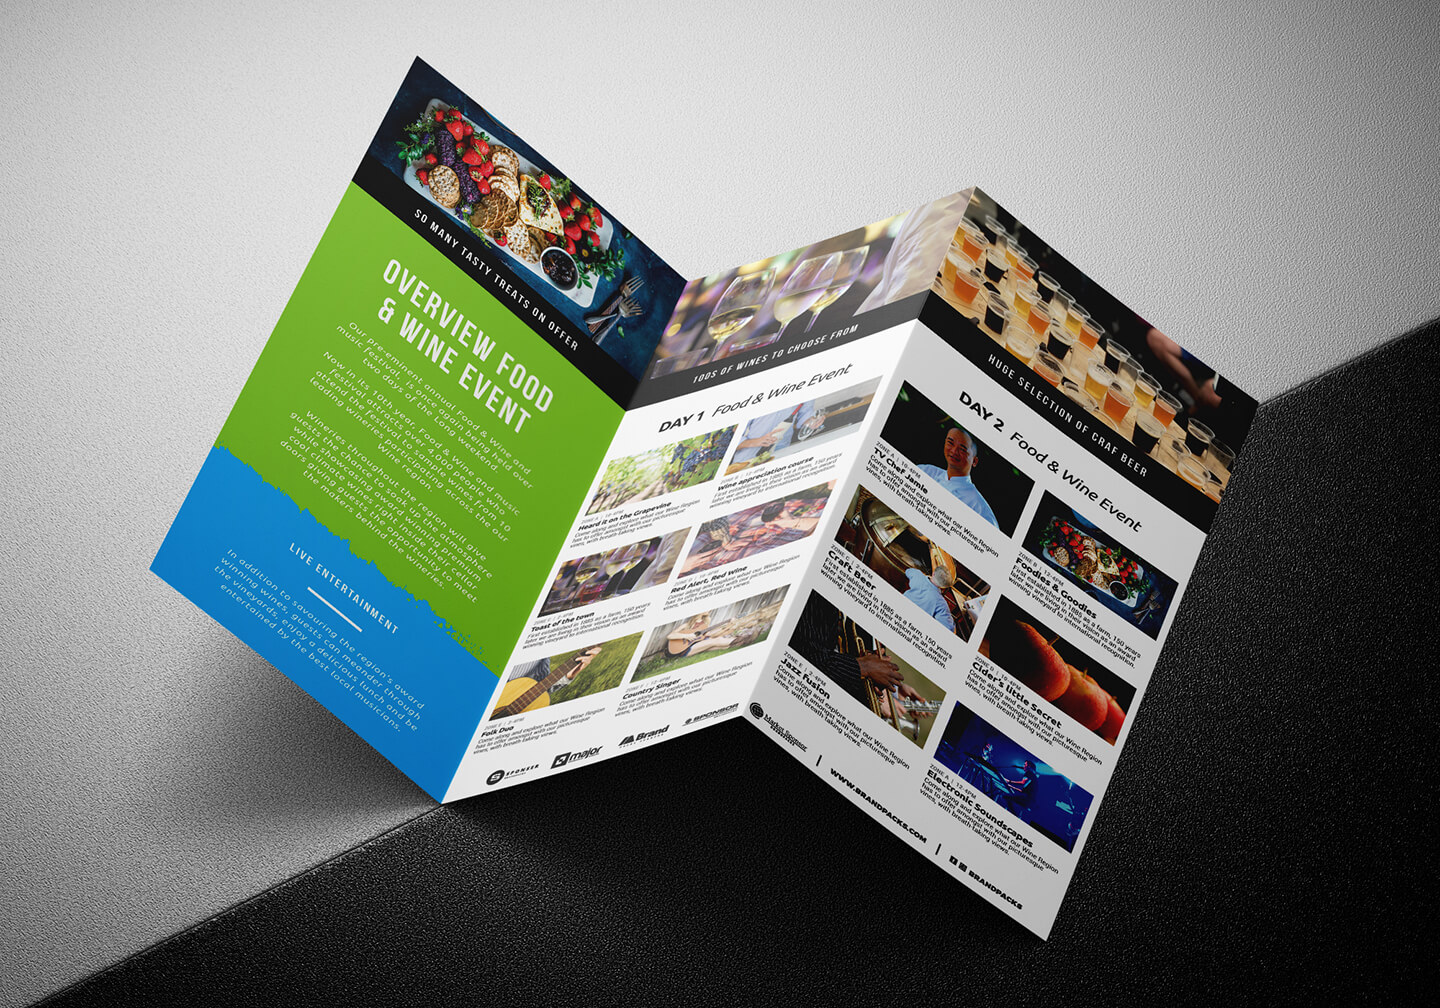 Free Tri Fold Brochure Template For Events & Festivals – Psd Intended For Tri Fold Brochure Template Illustrator Free